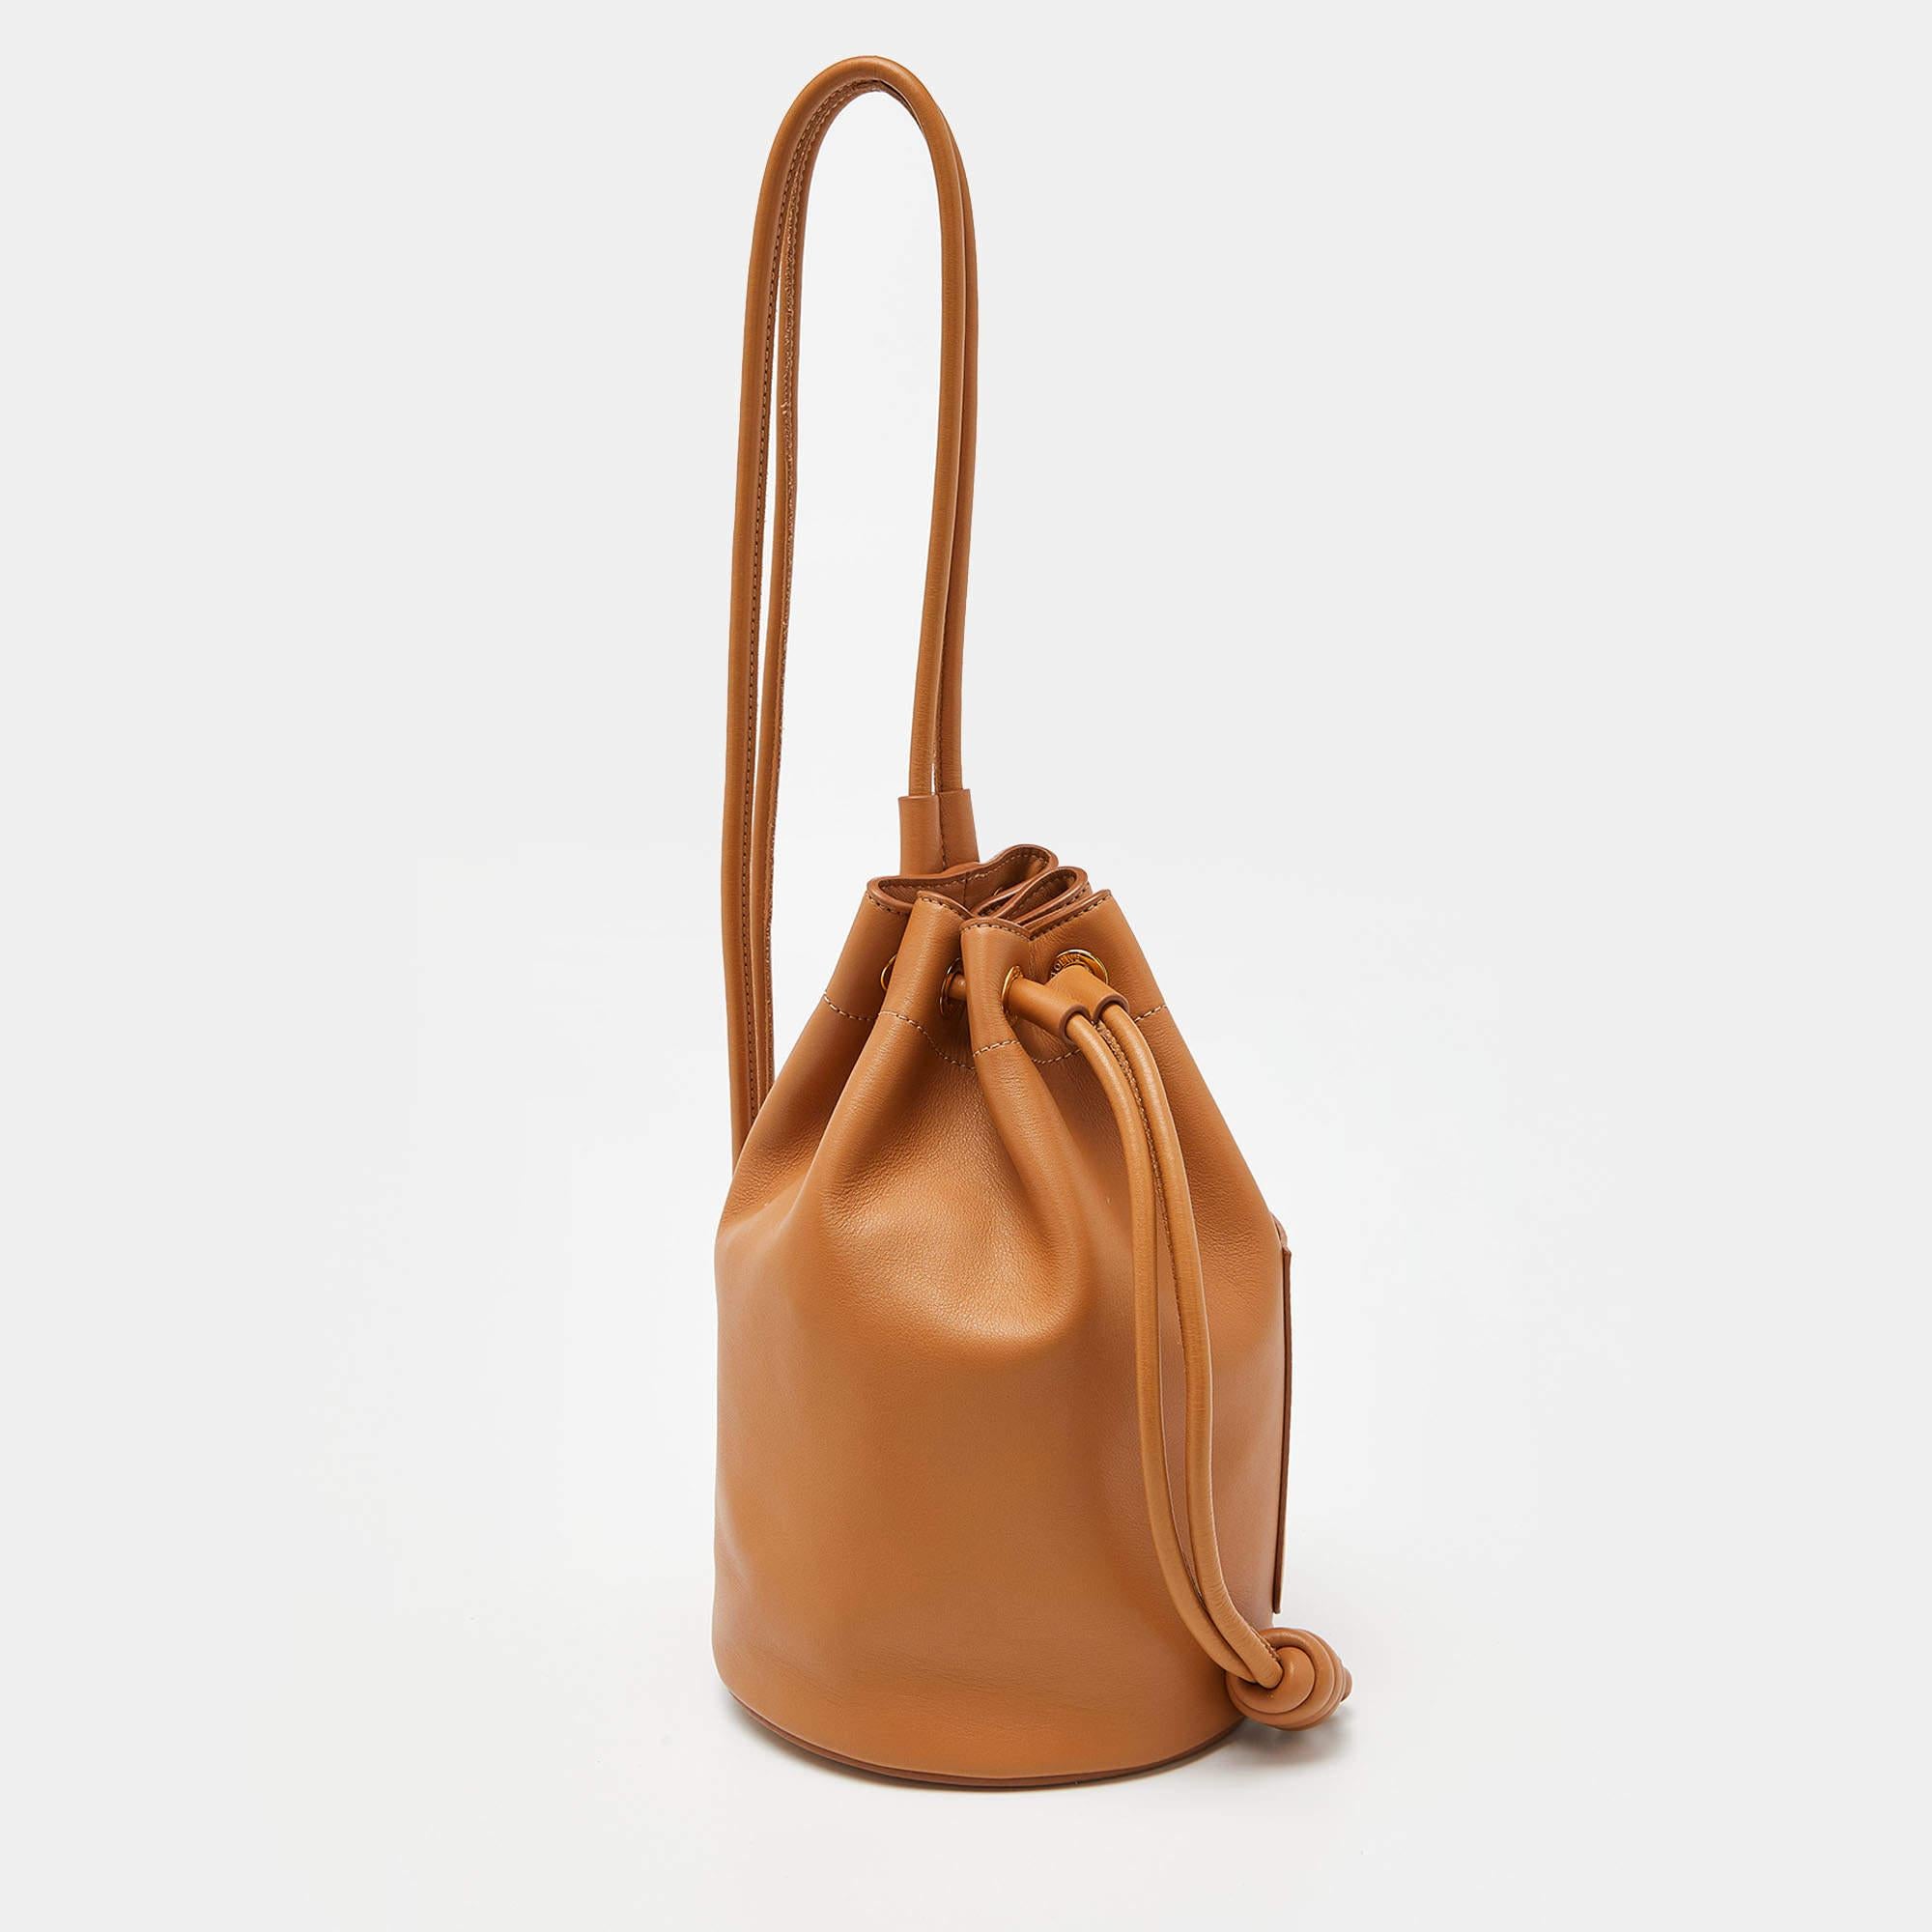 Designer bags are ideal companions for ample occasions! Here we have a fashion-meets-functionality piece crafted with precision. It has been equipped with a well-sized interior that can easily fit all your essentials.

